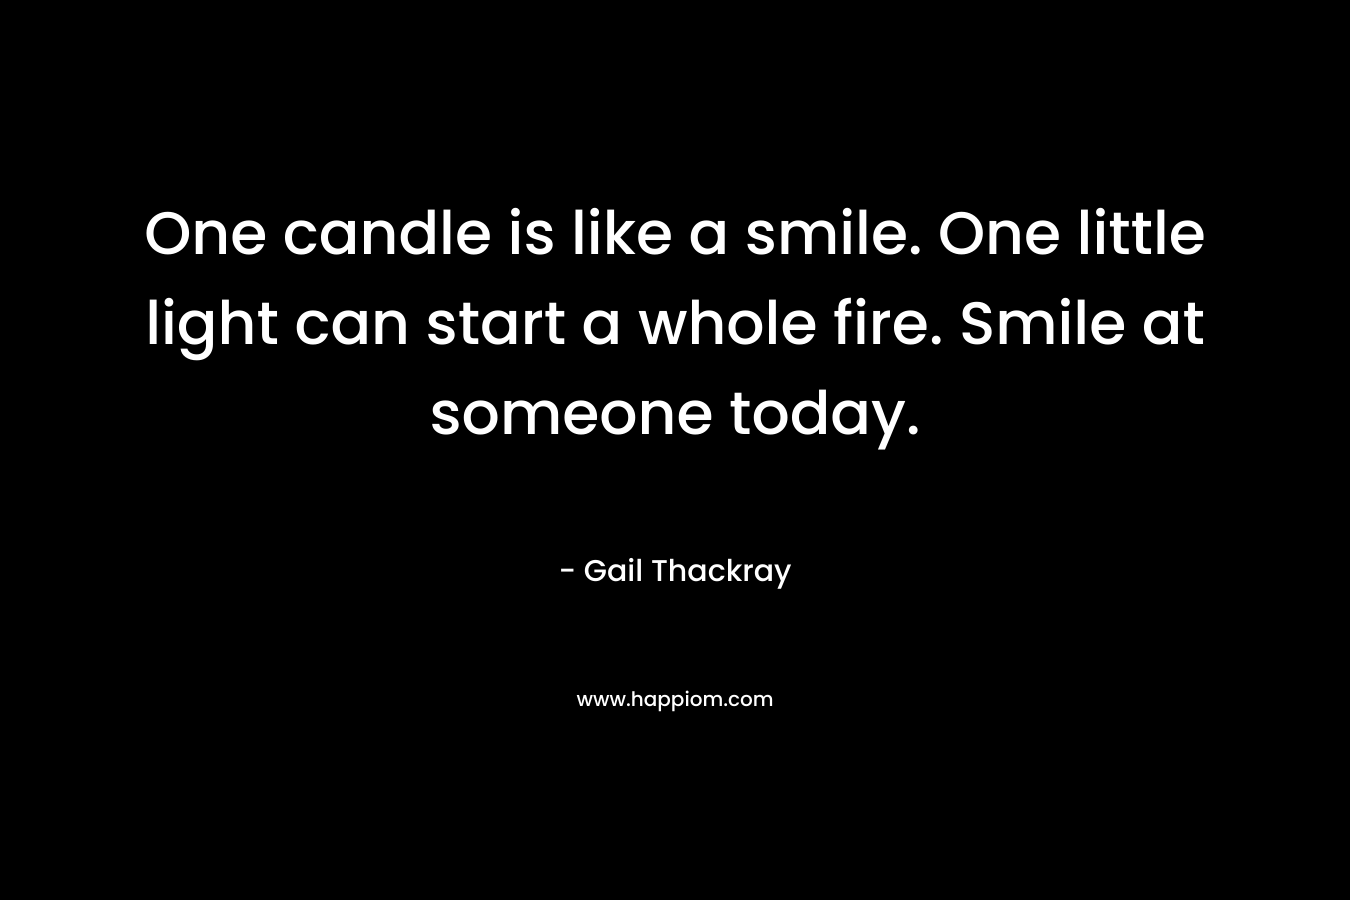 One candle is like a smile. One little light can start a whole fire. Smile at someone today.